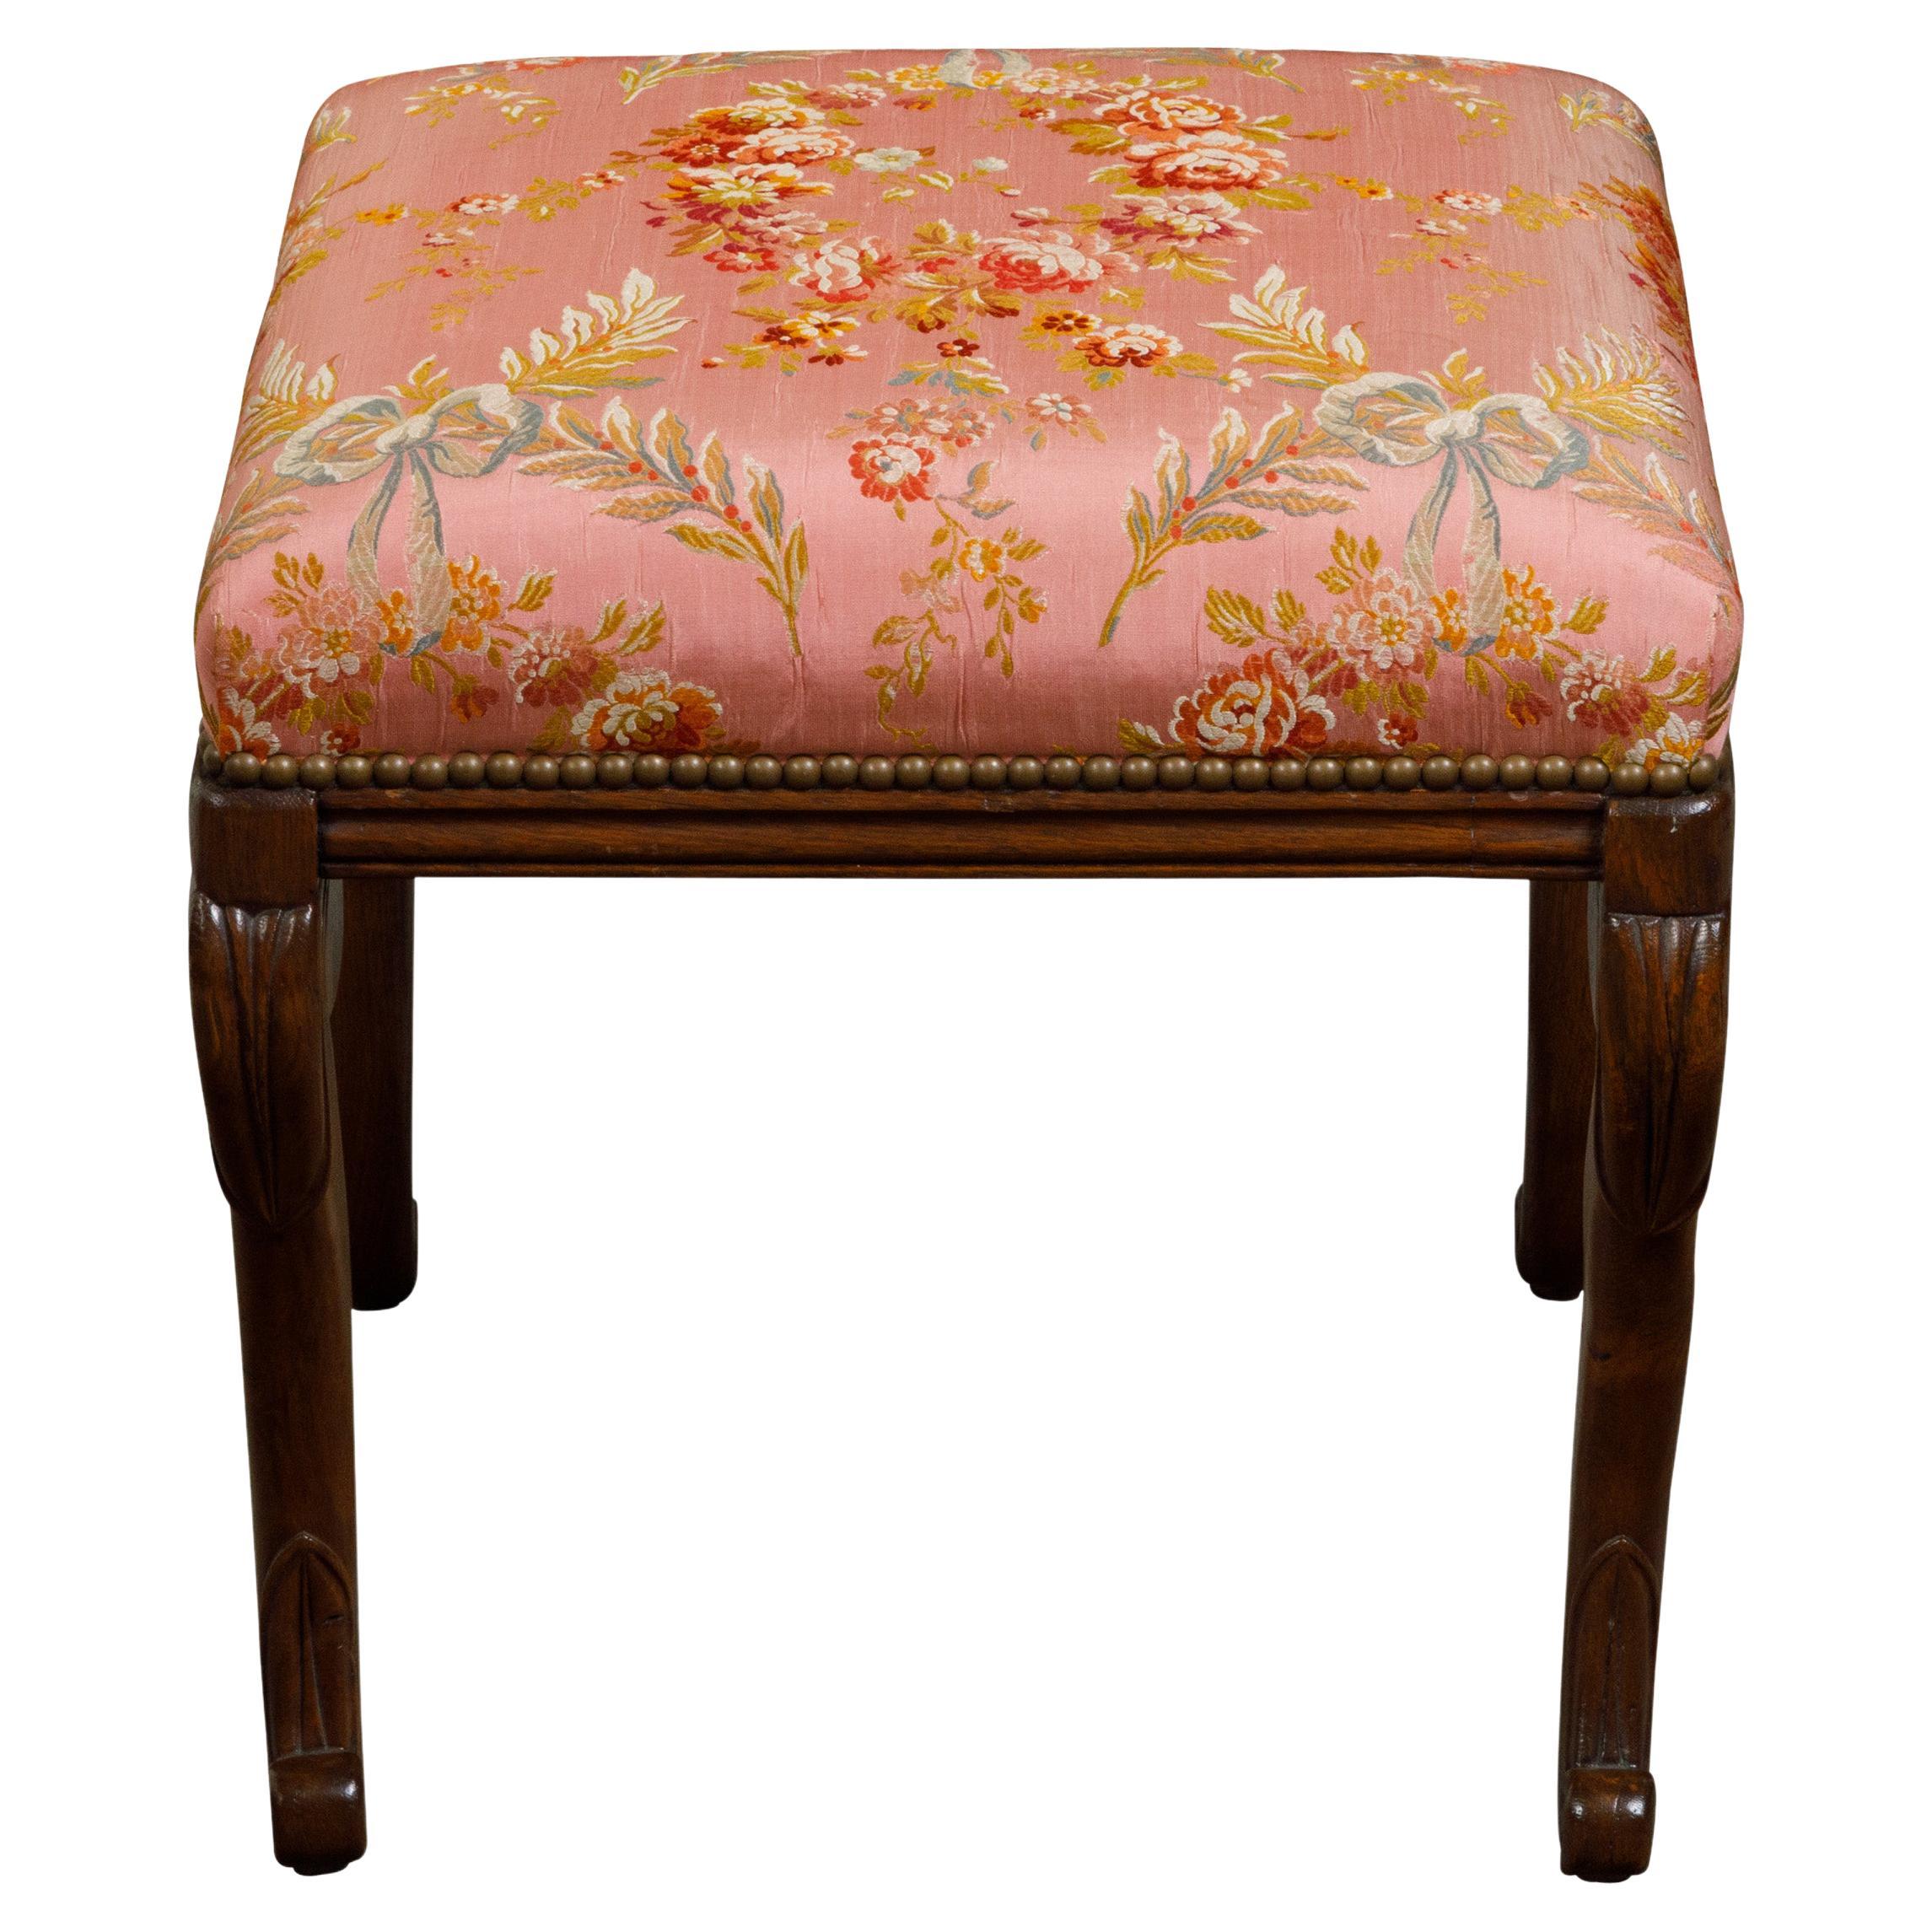 English 1820s Mahogany Stool with Floral Themed Upholstery and Cabriole Legs For Sale